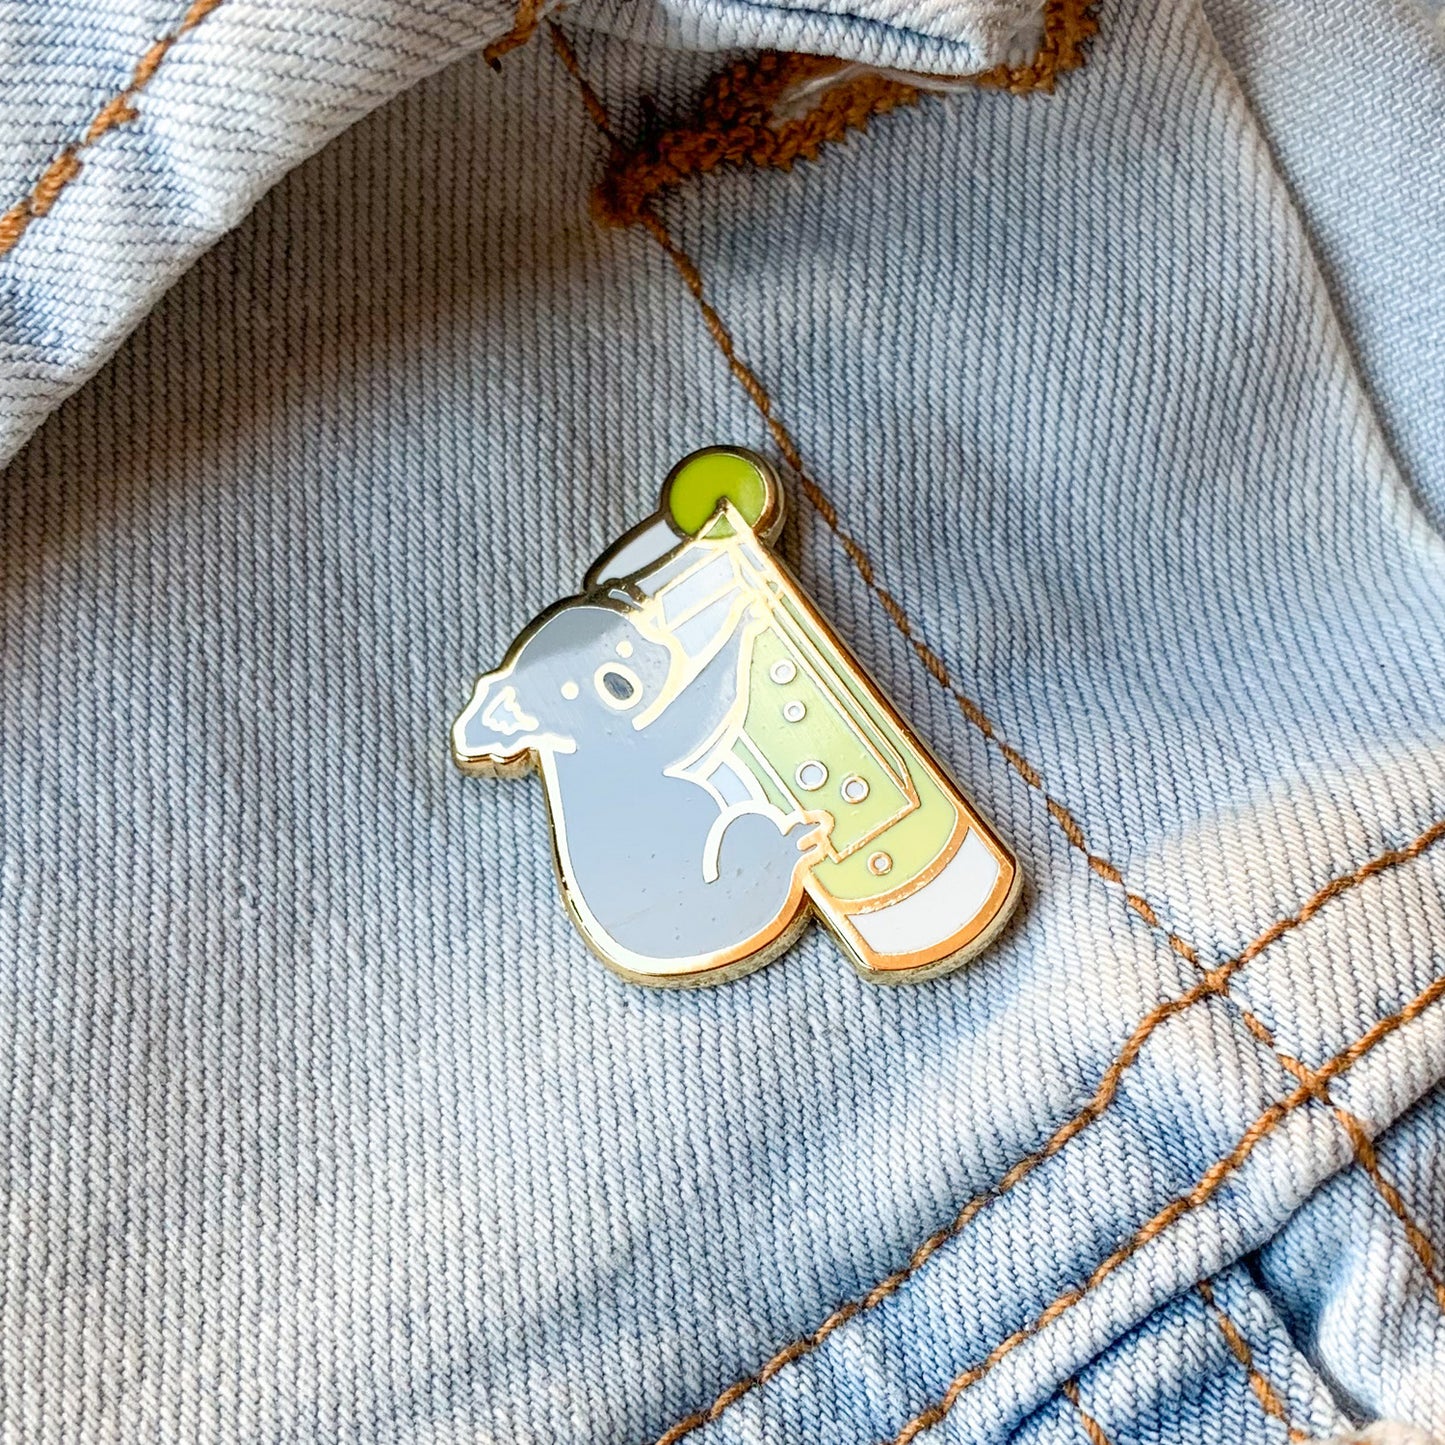 Koala & Tom Collins Cocktail Hard Enamel Pin by Cocktail Critters